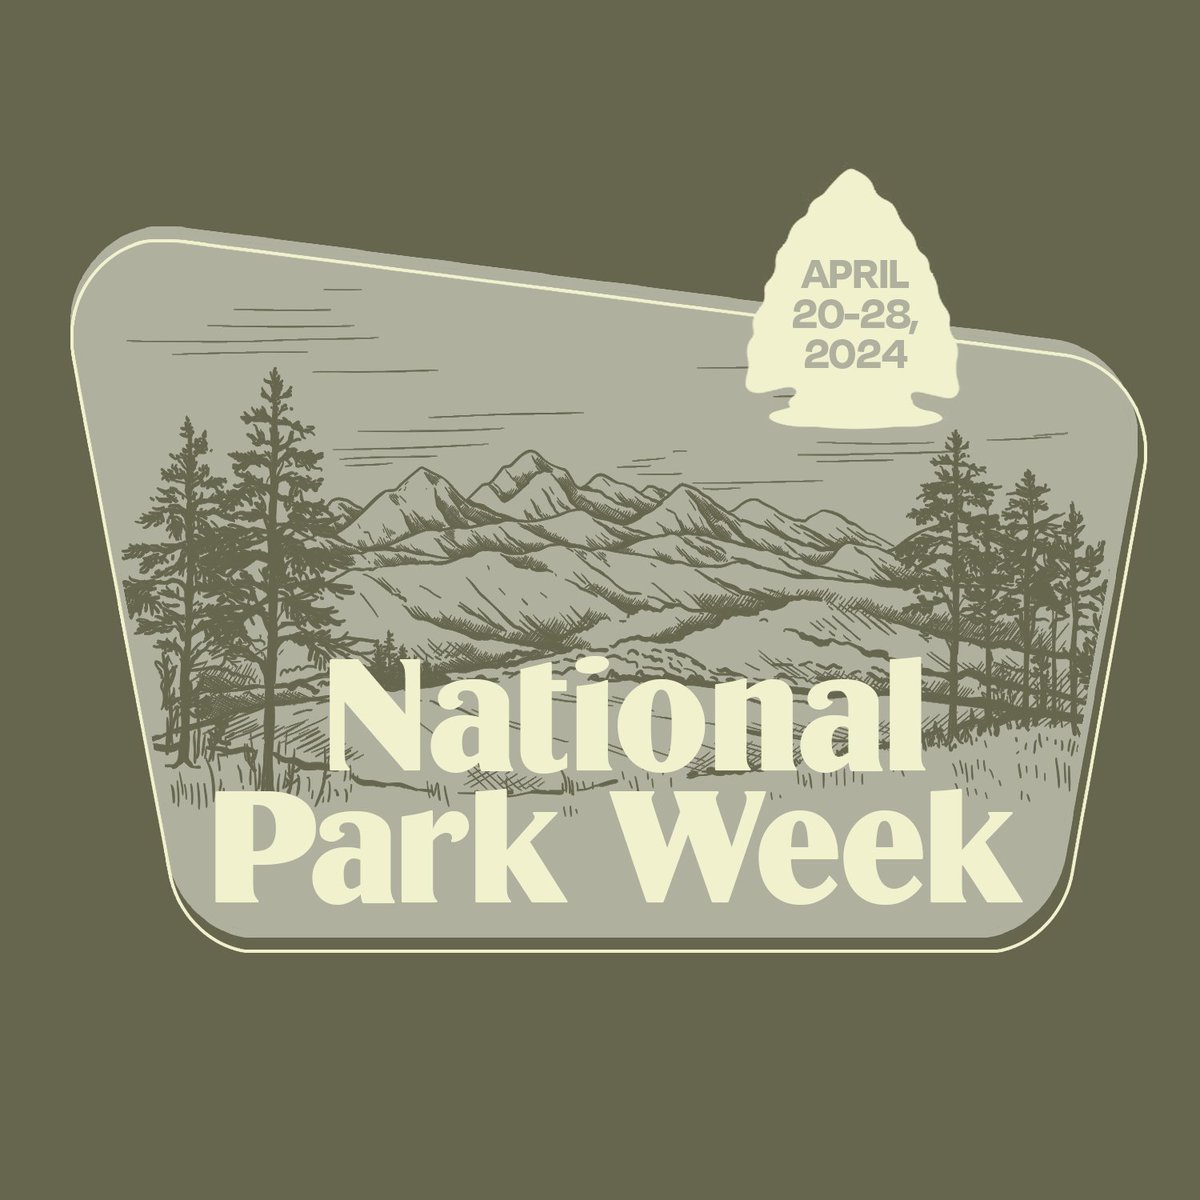 Alabama is proud to be home to nine different National Parks and two National Heritage Areas, providing spaces for outdoor recreation and historical significance in our great state. Happy National Park Week.